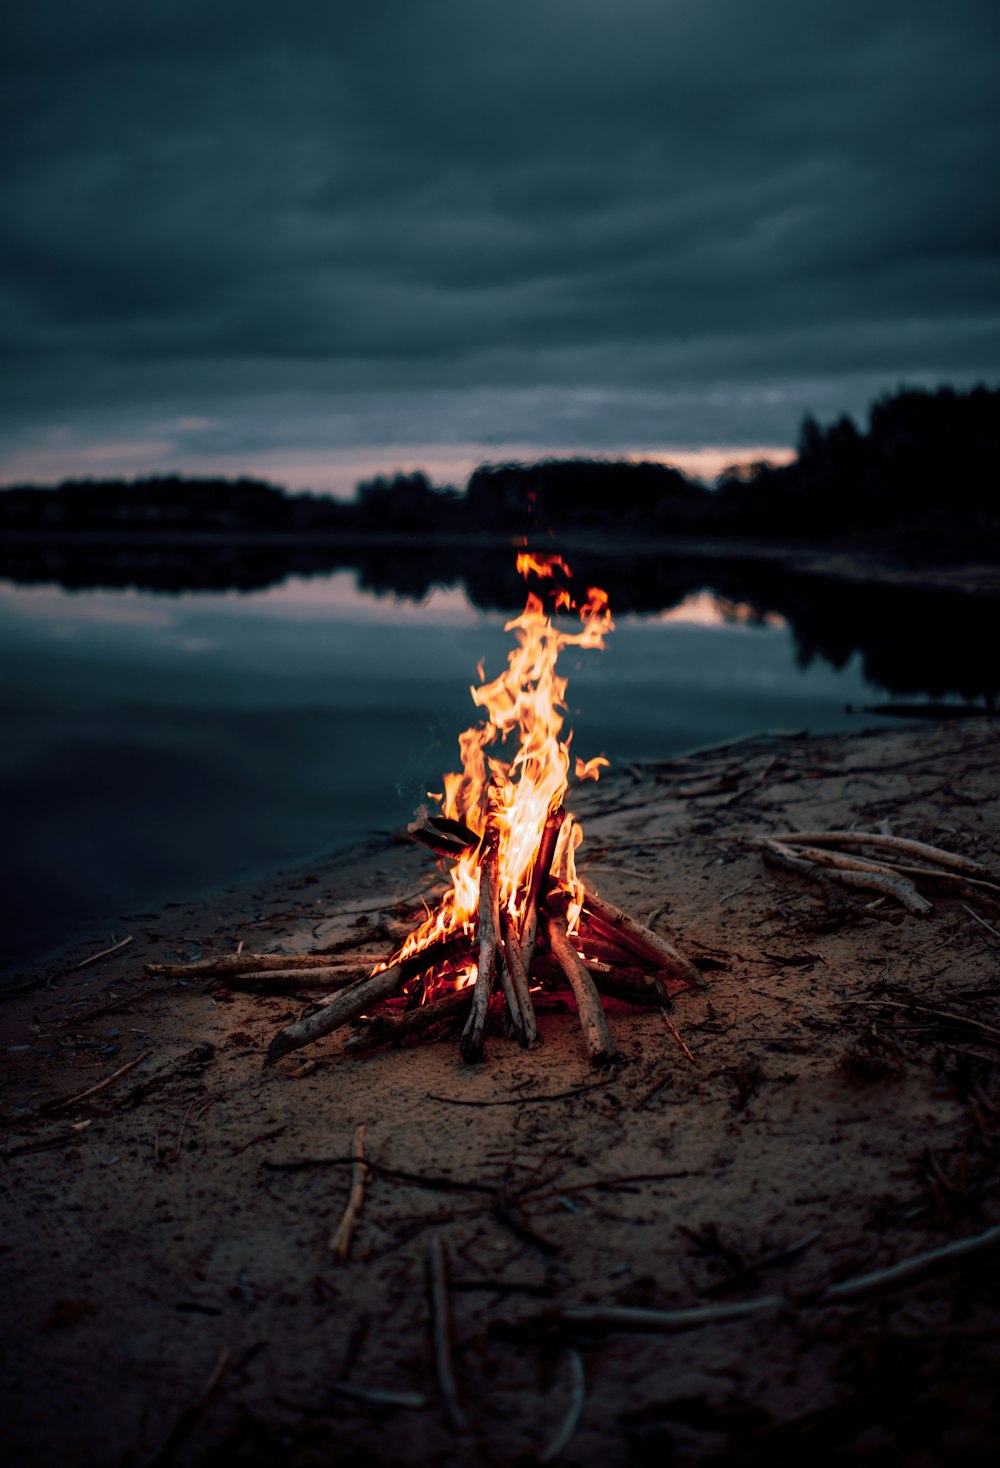 bonfire near body of water during night time